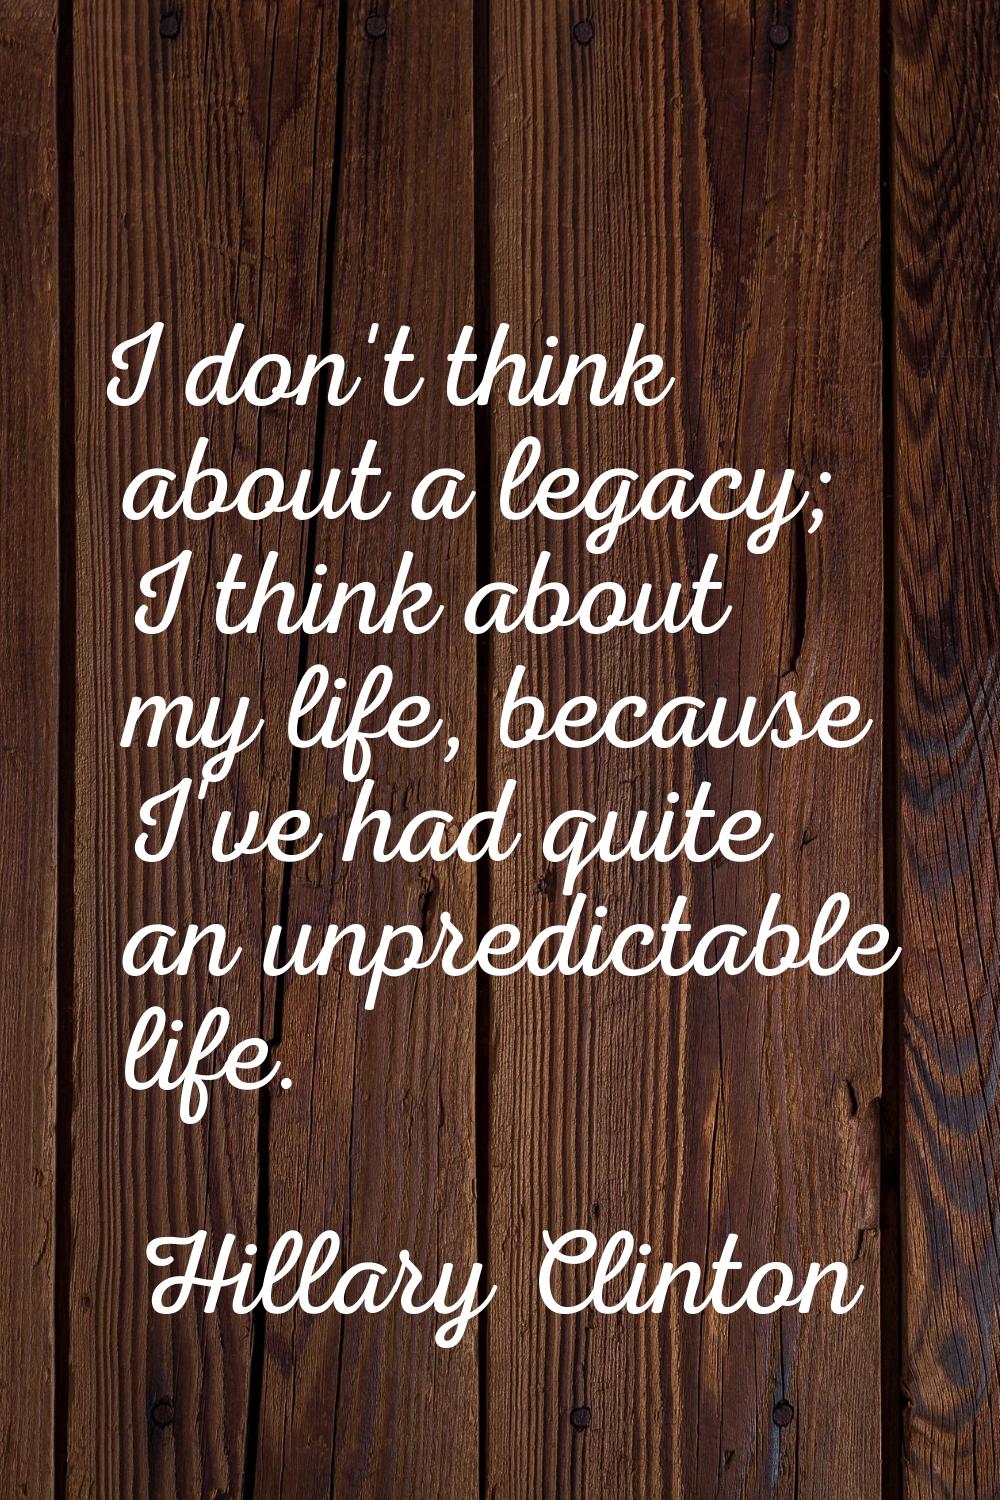 I don't think about a legacy; I think about my life, because I've had quite an unpredictable life.